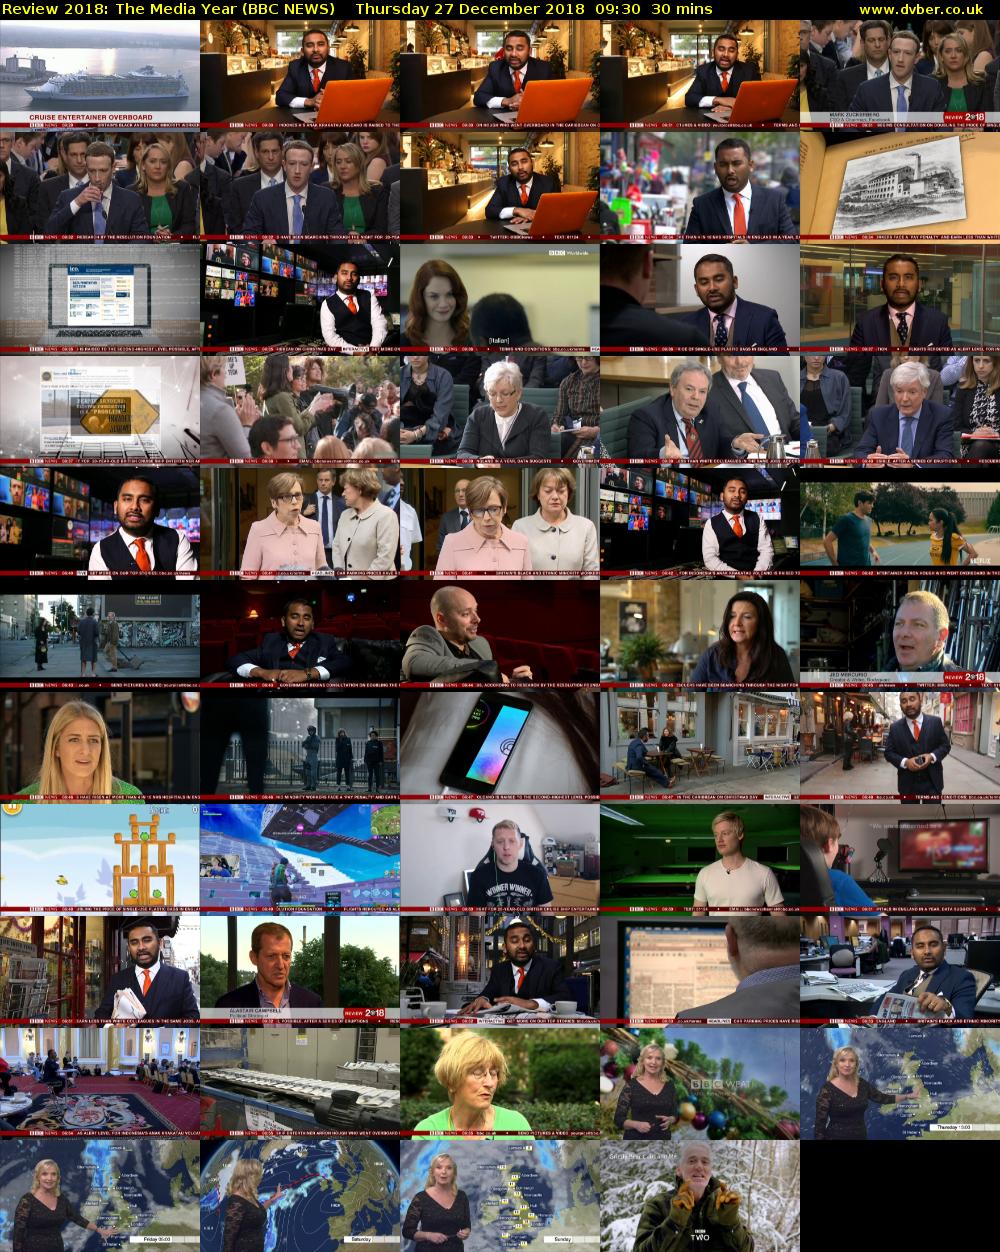 Review 2018: The Media Year (BBC NEWS) Thursday 27 December 2018 09:30 - 10:00